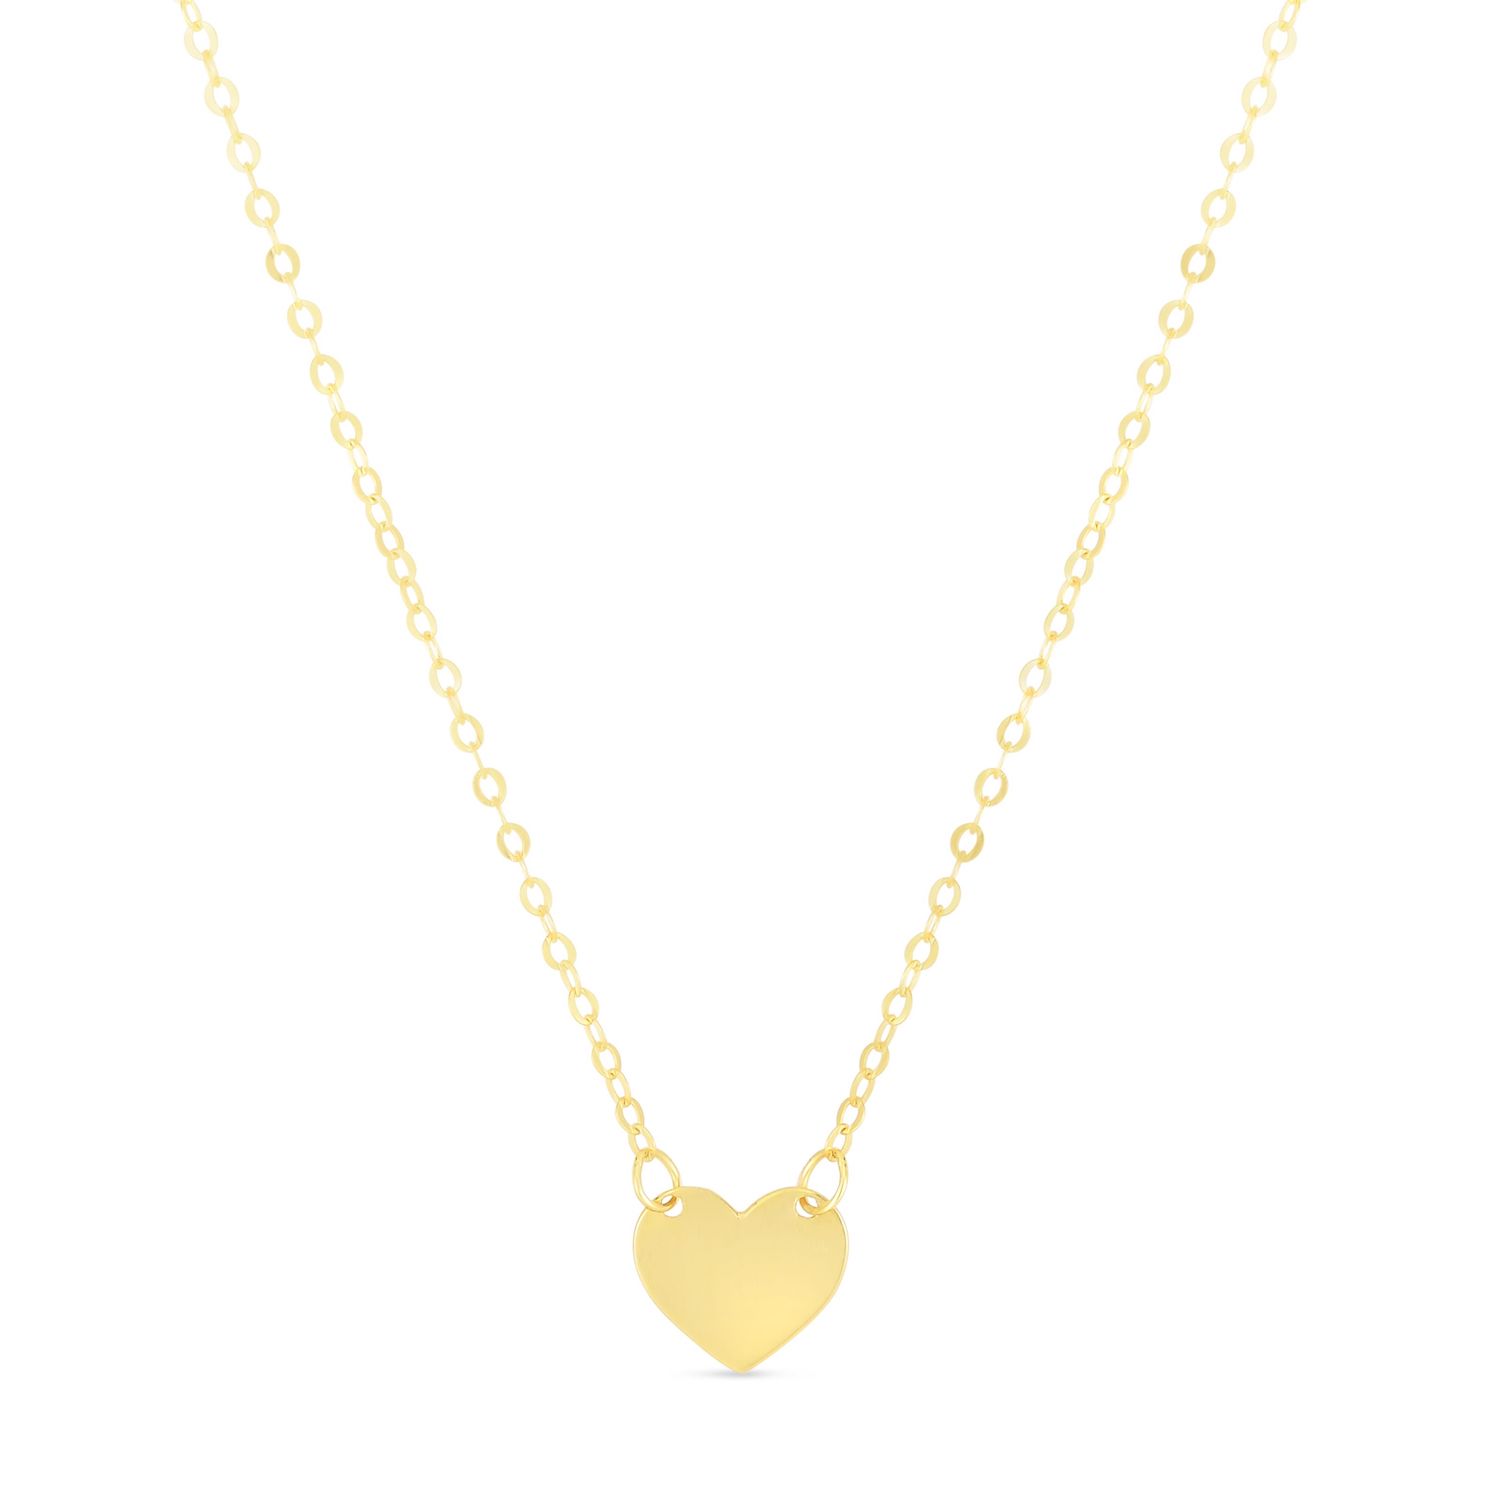 Engravable 14K Gold Heart Pendant Cable Chain Necklace 16"-18" Adjustable - Yellow Gold